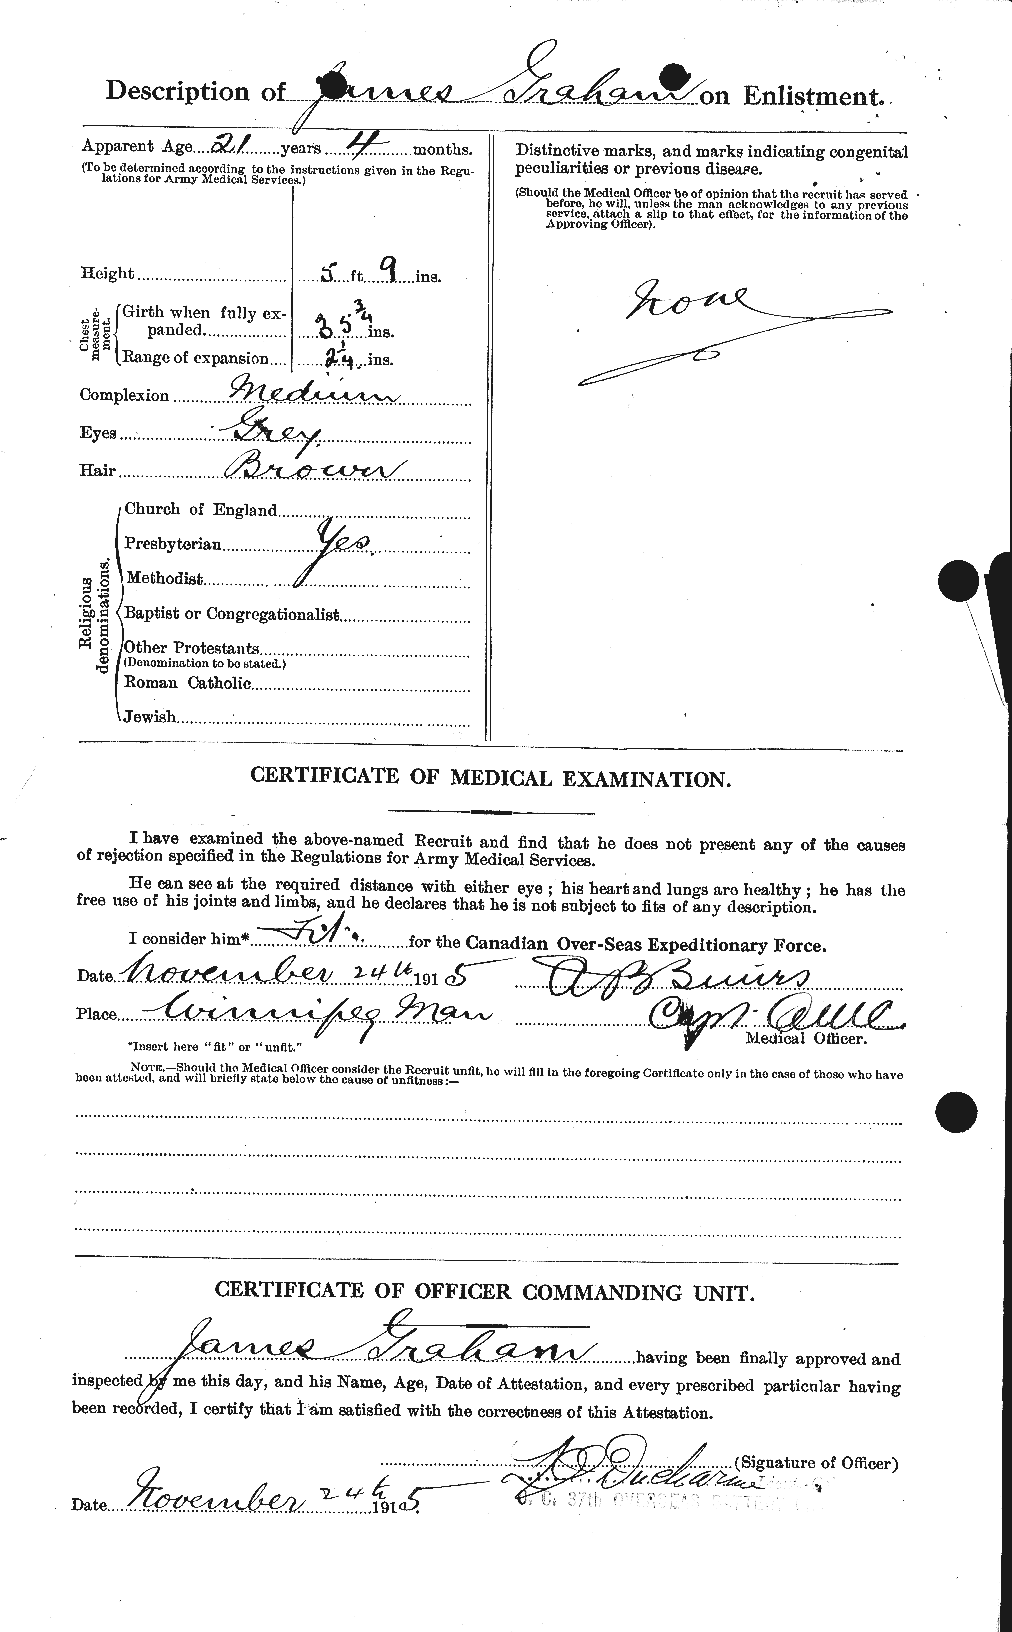 Personnel Records of the First World War - CEF 357799b